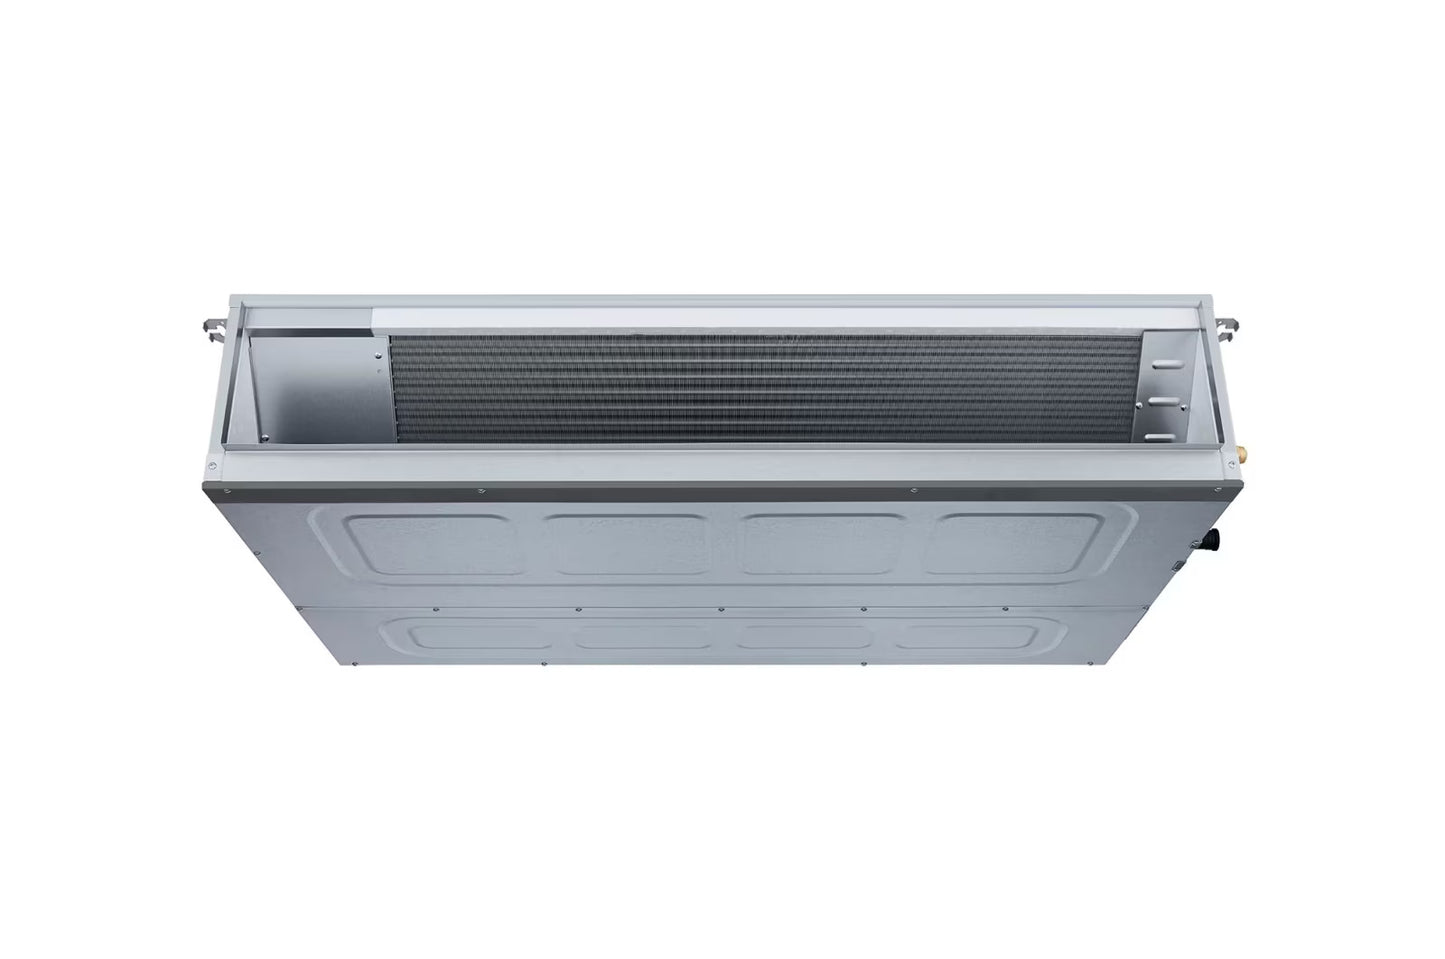 LG Ceiling Concealed Duct INV Unit 3.6KW with Mid Static and E.S.P. Control for Multiple Rooms - ARNU12GM1A4